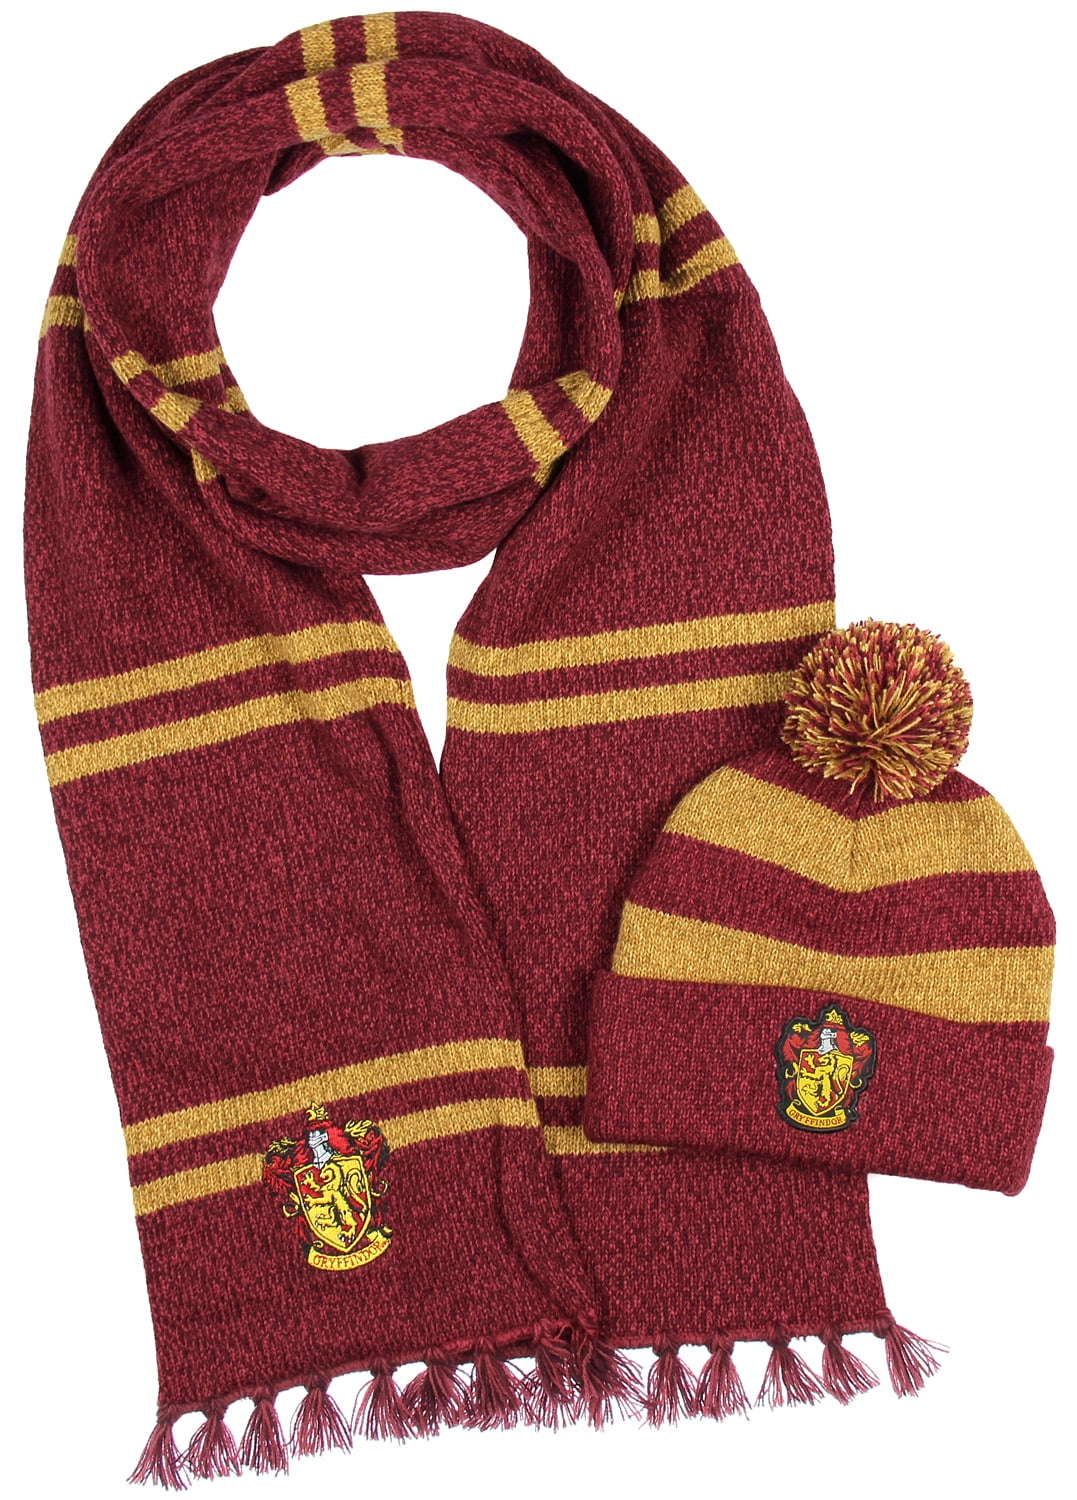 Official Harry Potter Hogwarts Knit Hat and Scarf Set Beanie Unisex One Size 